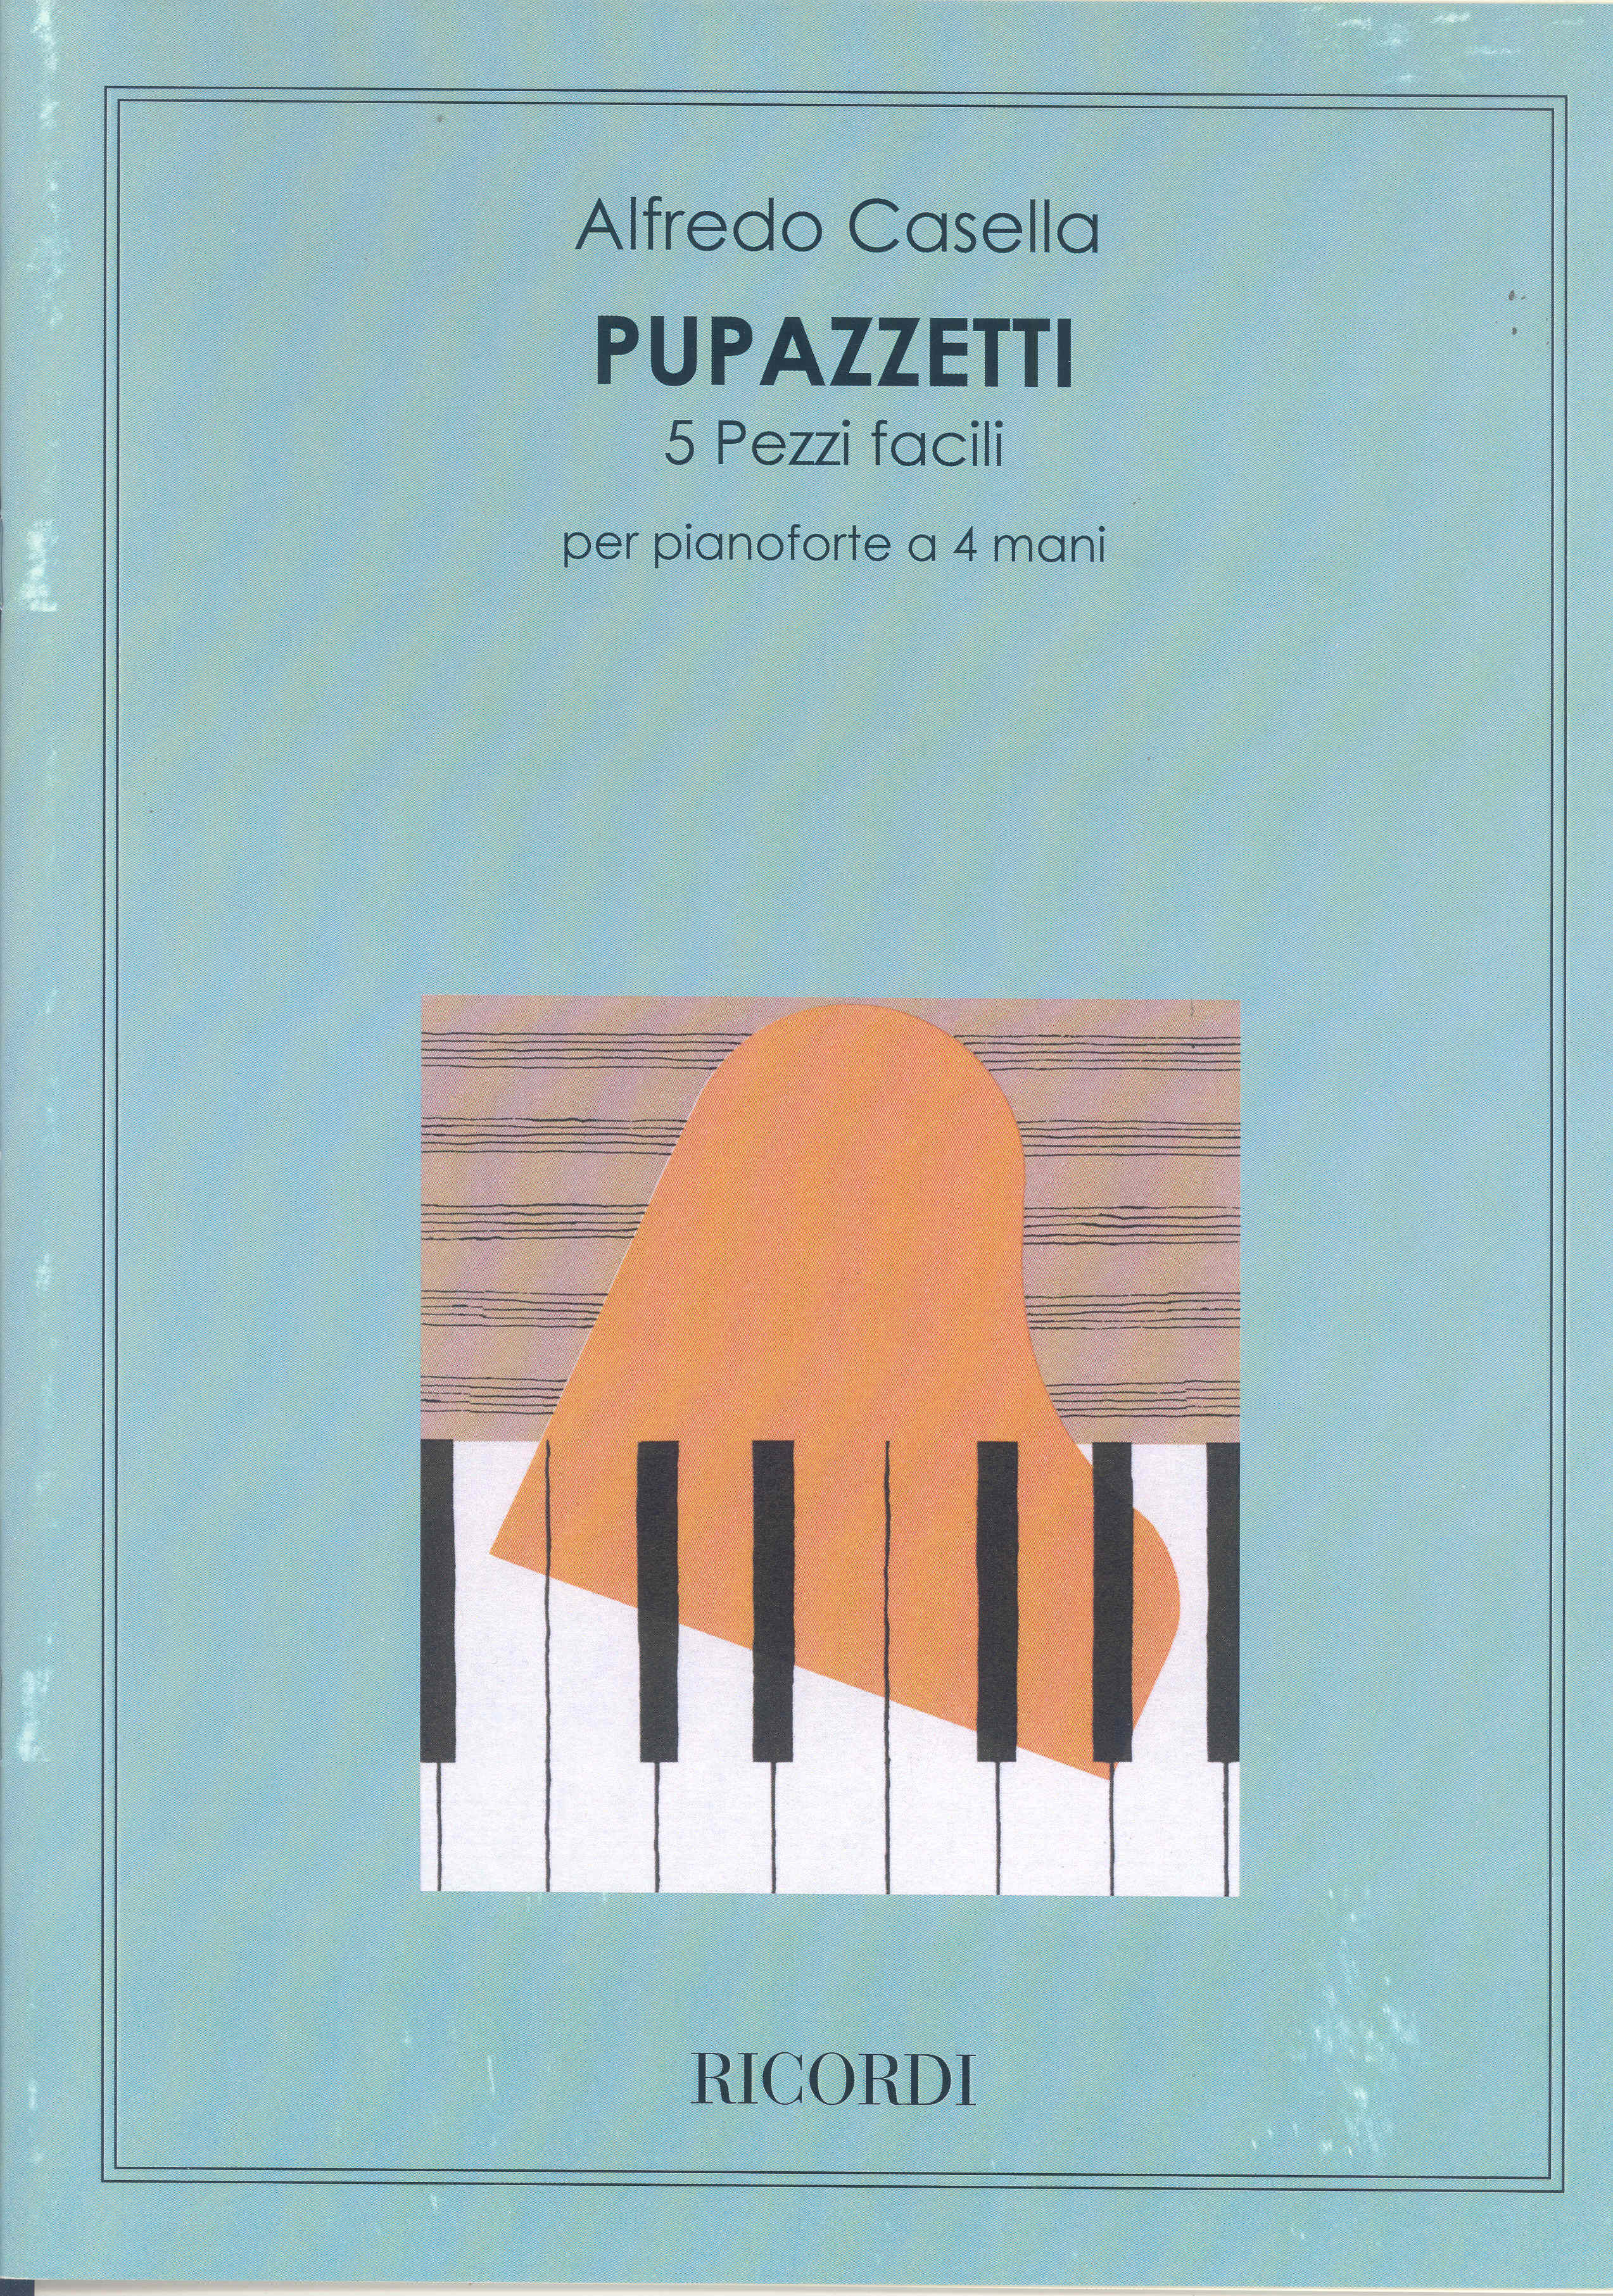 Casella Pupazzetti (5 Pieces) Piano Duet Sheet Music Songbook